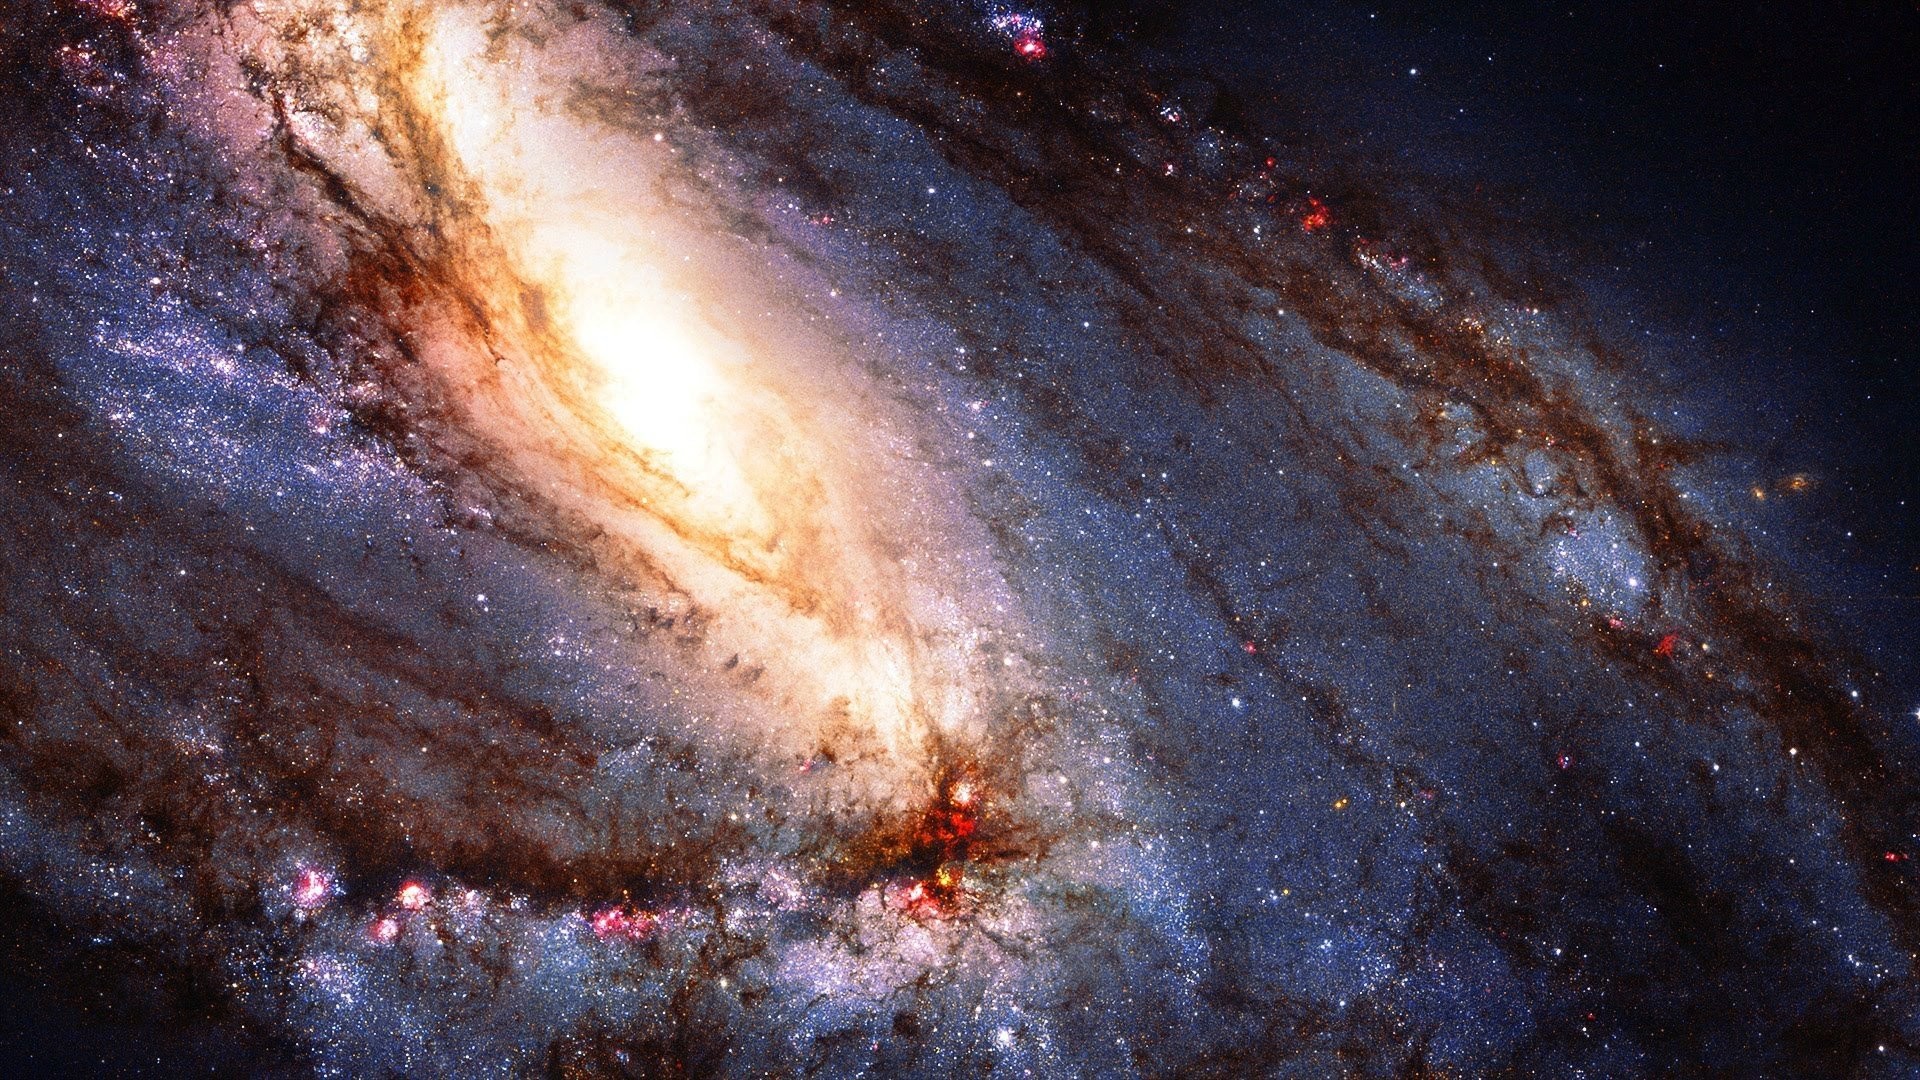 1920x1080 Space outer universe stars photography detail astronomy nasa hubble  wallpaper |  | 670133 | WallpaperUP